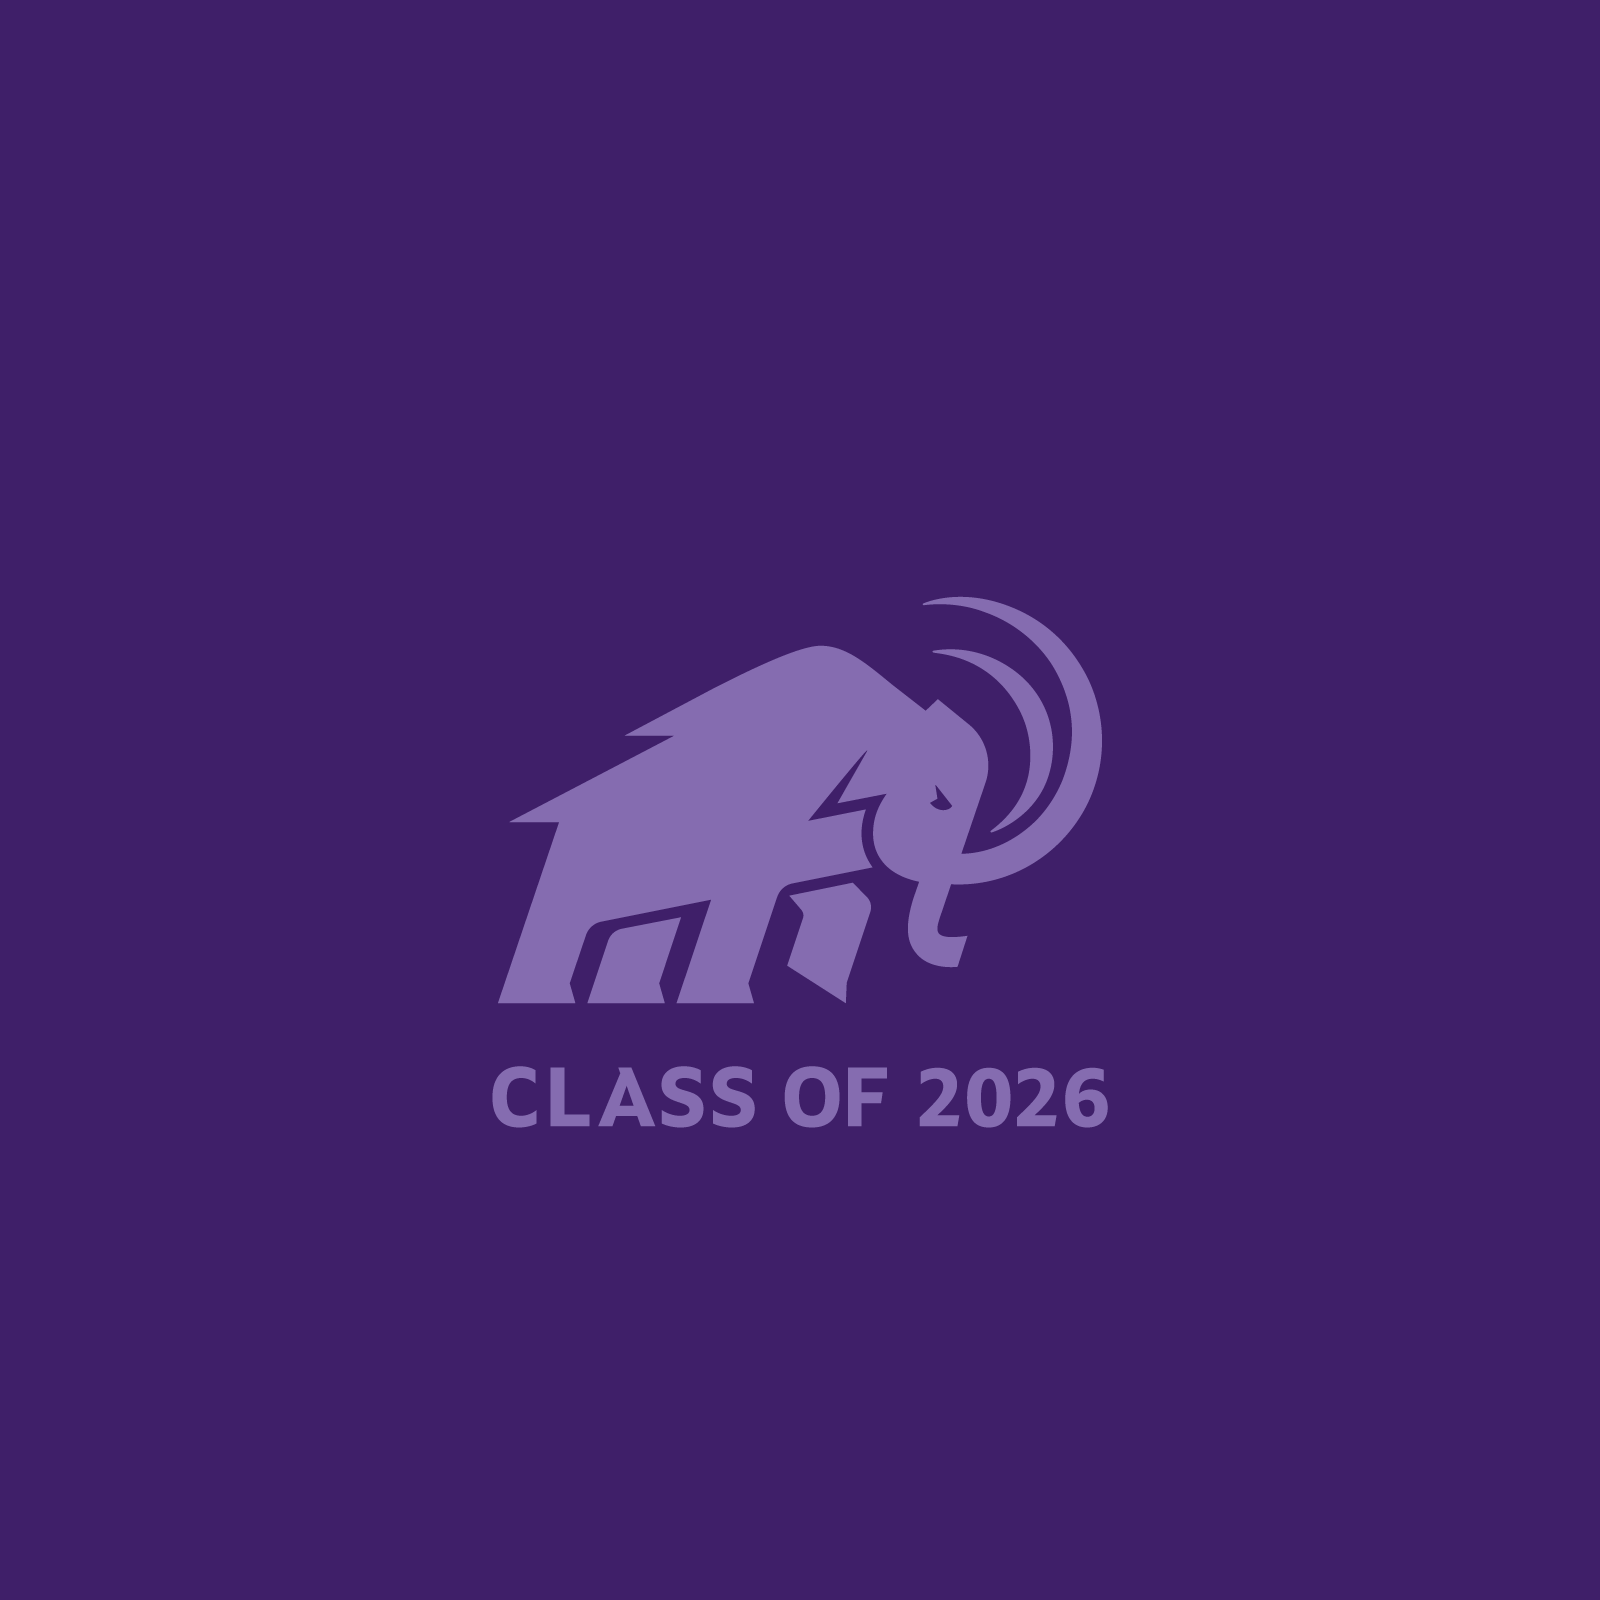 Mammoth on purple background with Class of 2026